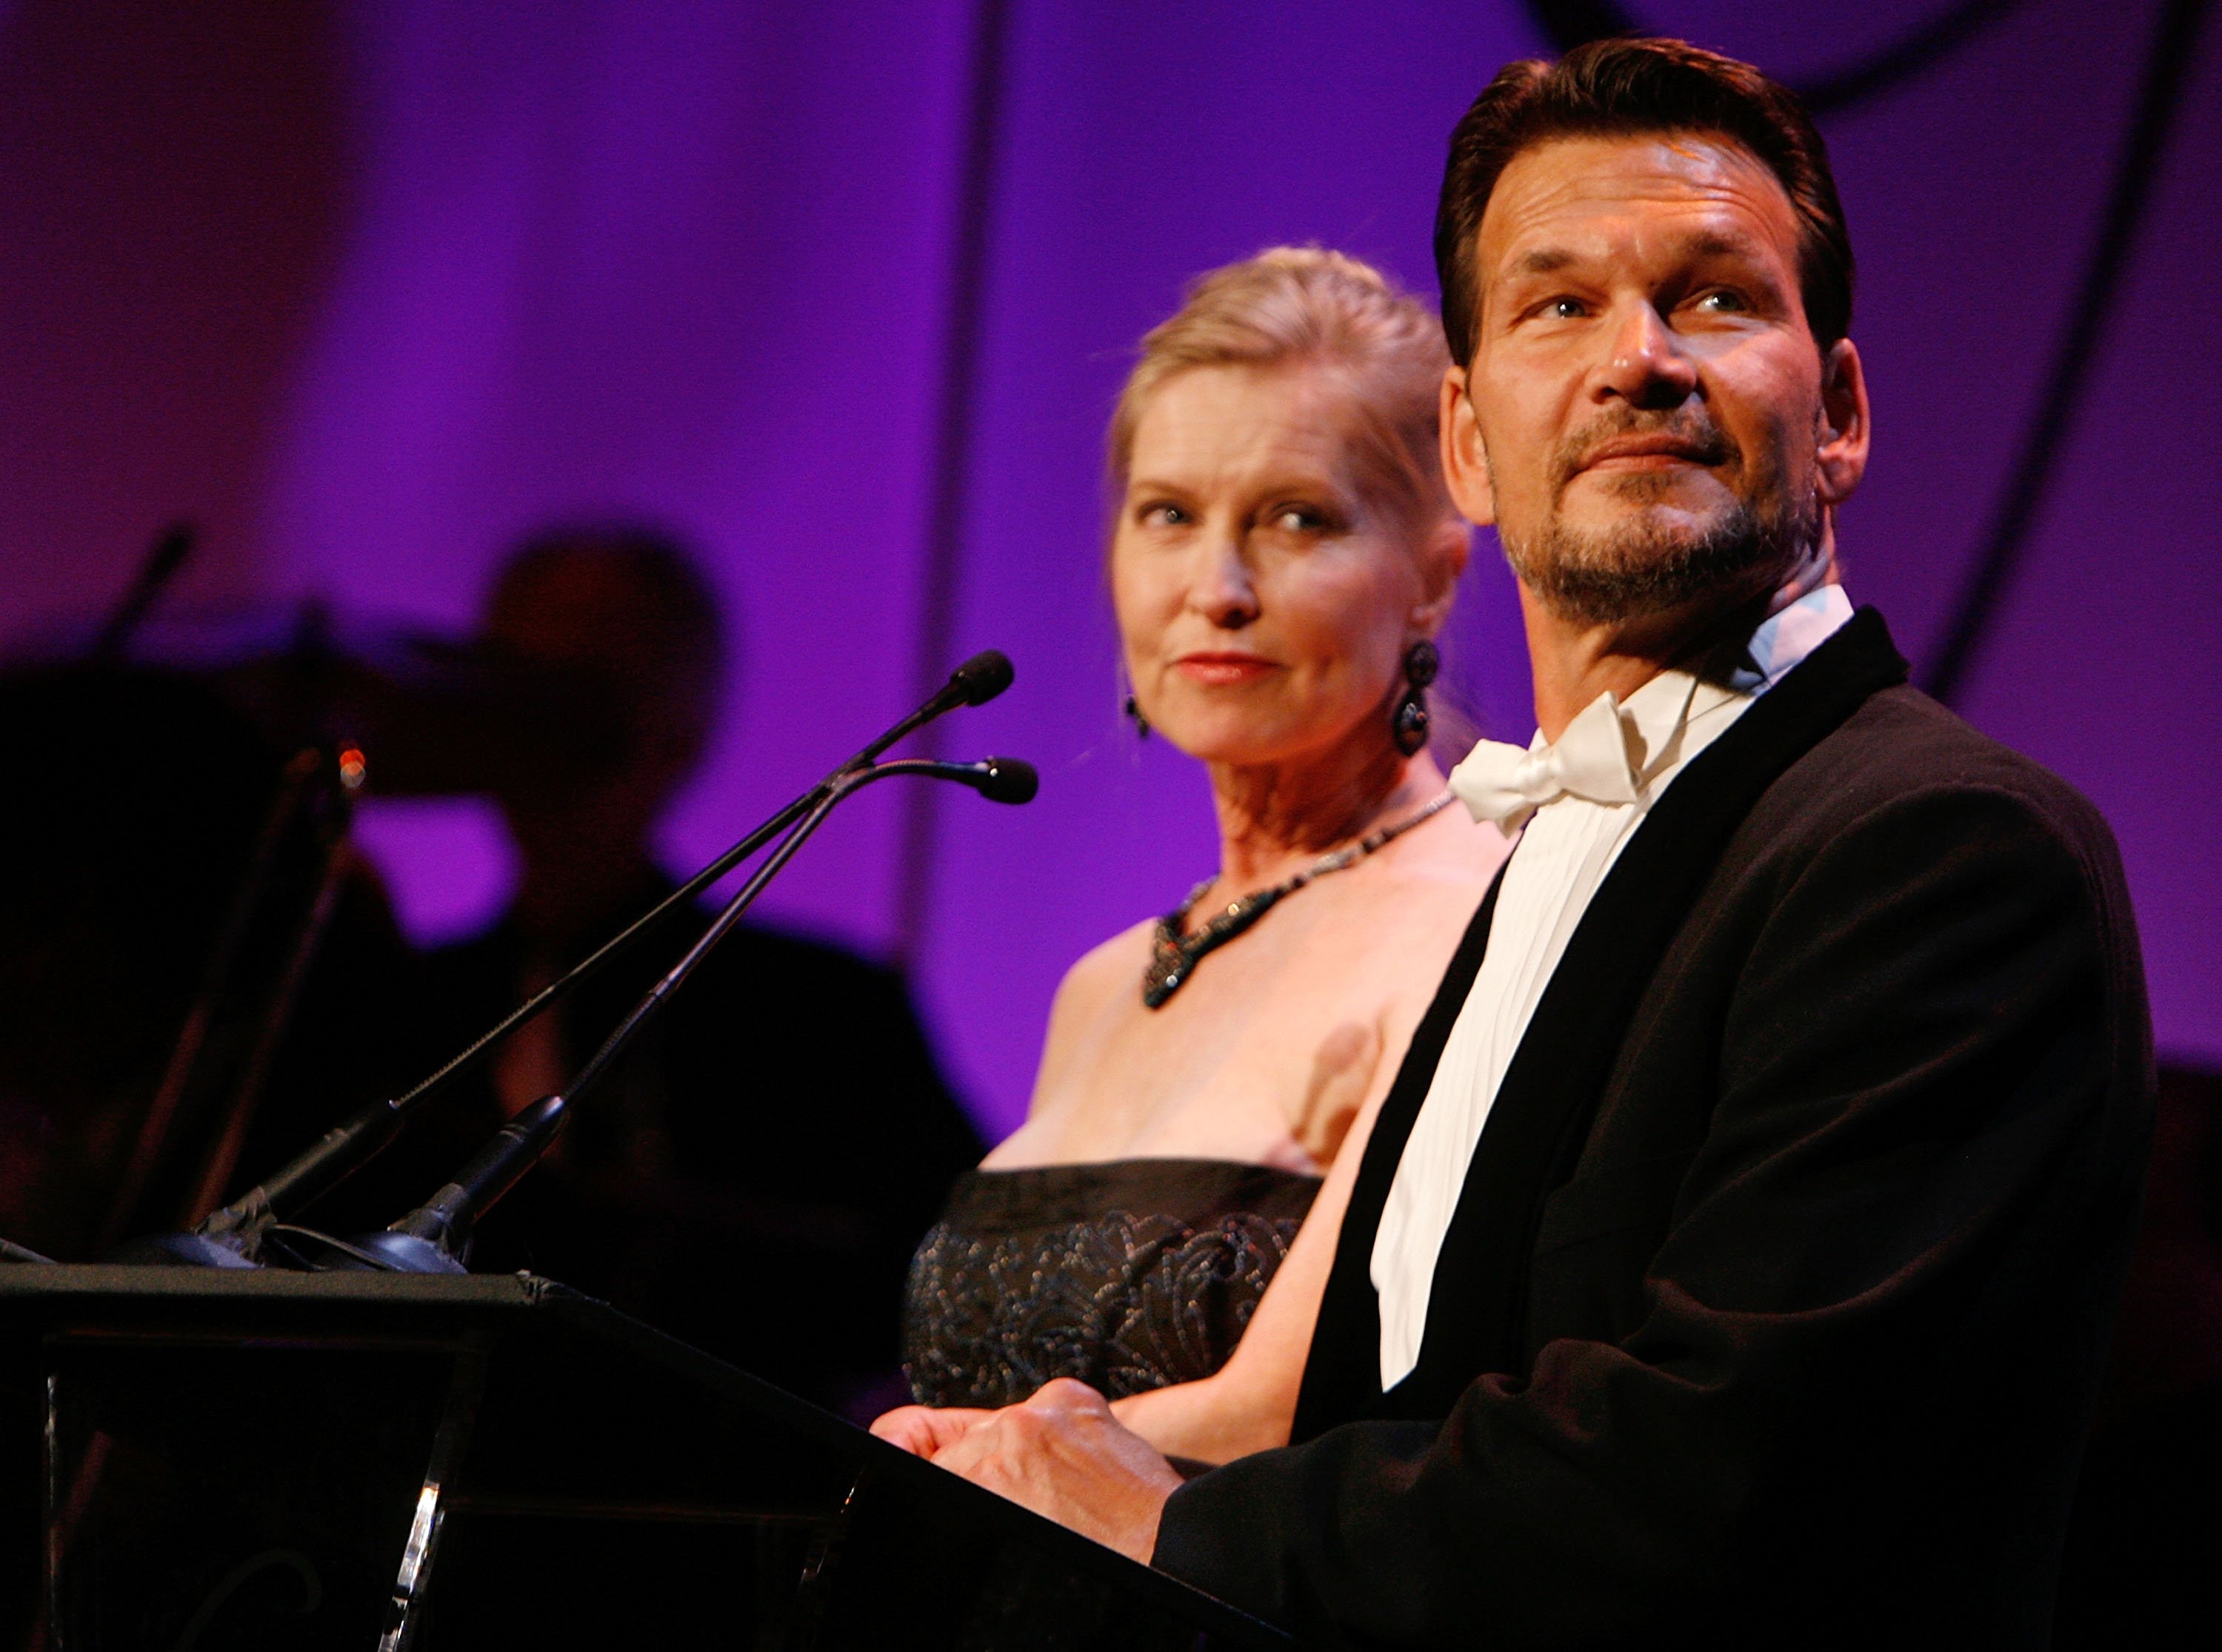 Lisa Niemi (L) and actor Patrick Swayze speak onstage during the 9th annual Costume Designers Guild Awards held at the Beverly Wilshire Hotel on February 17, 2007 in Beverly Hills, California. | Source: Getty Images